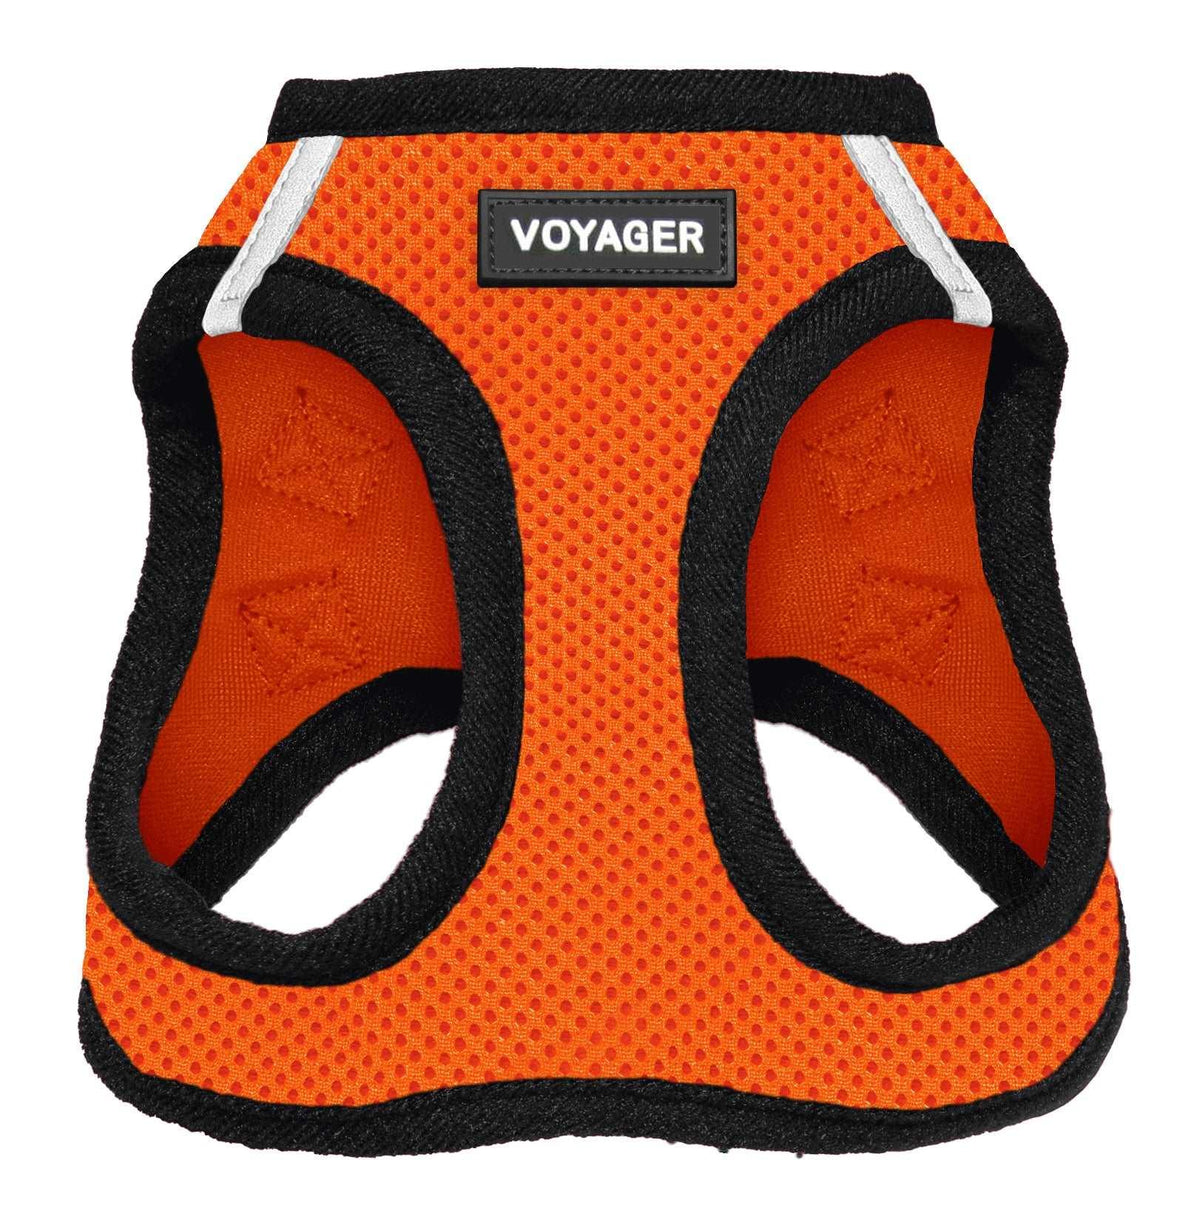 VOYAGER Step-In Air Pet Harness in Orange with Black Trim - Front